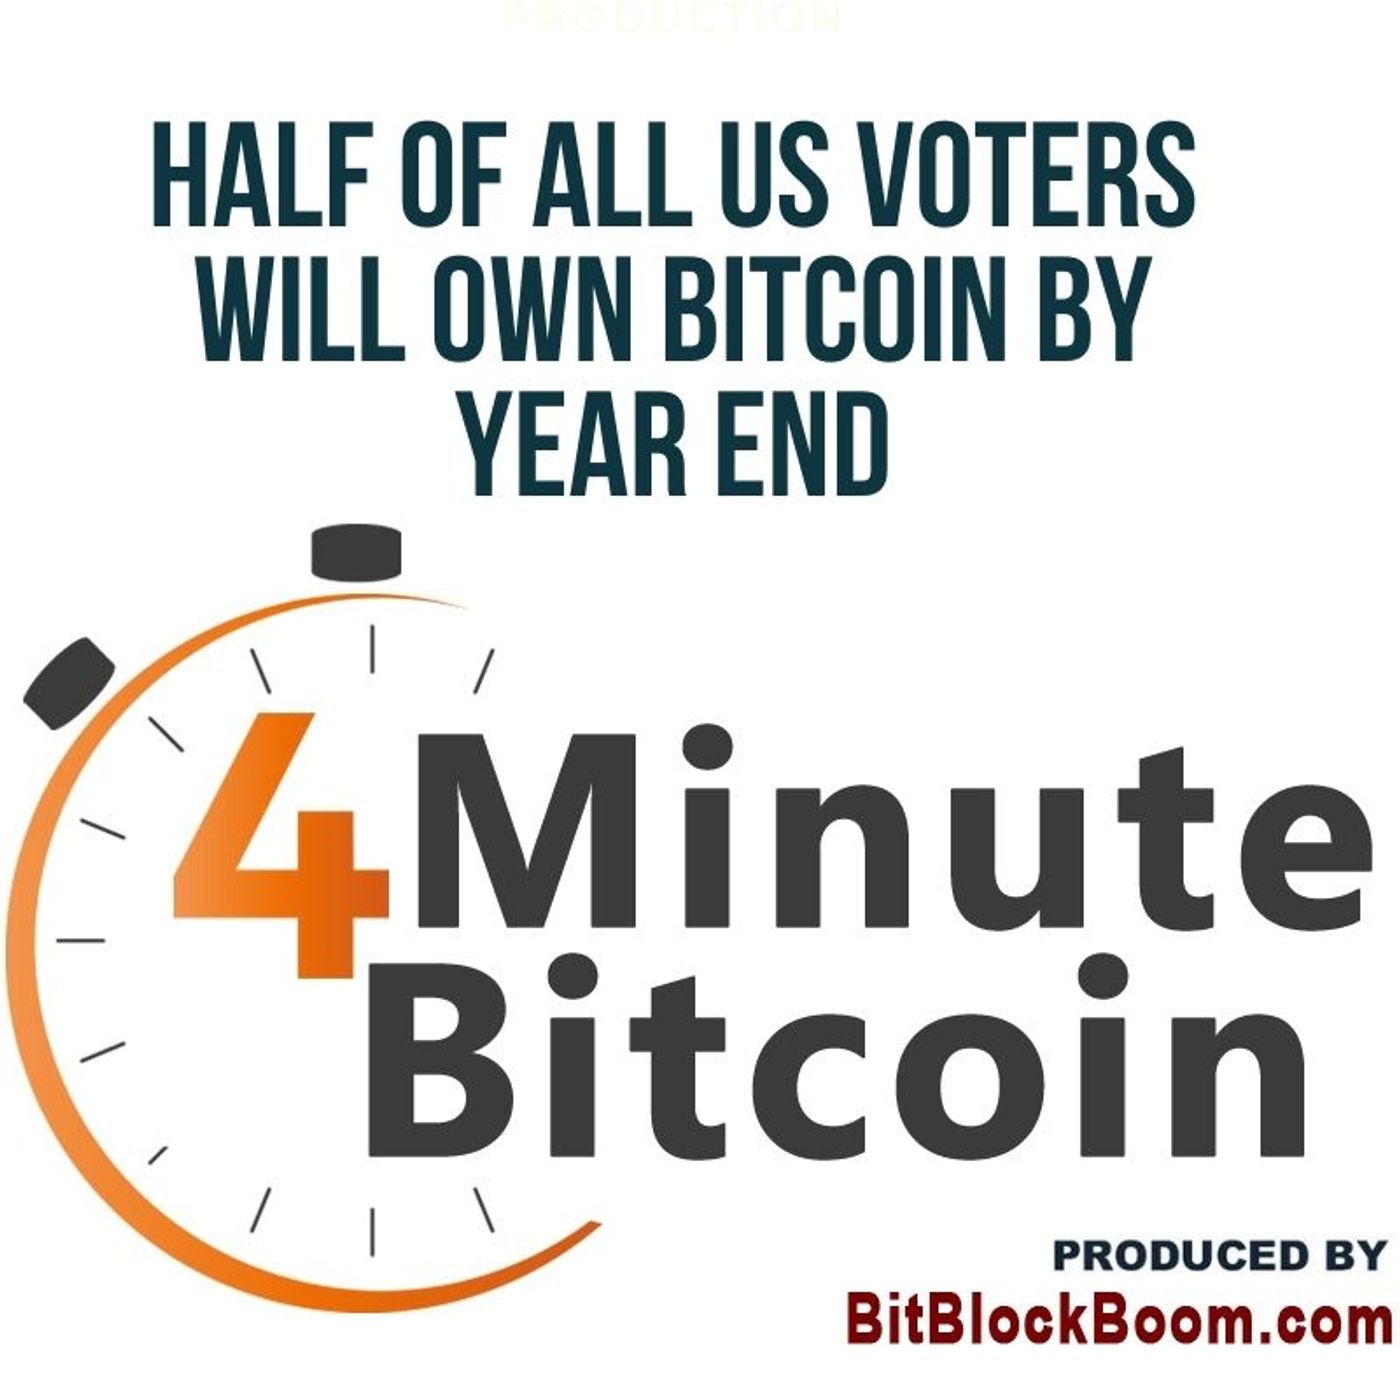 Half of All US Voters Will Own Bitcoin by Year End